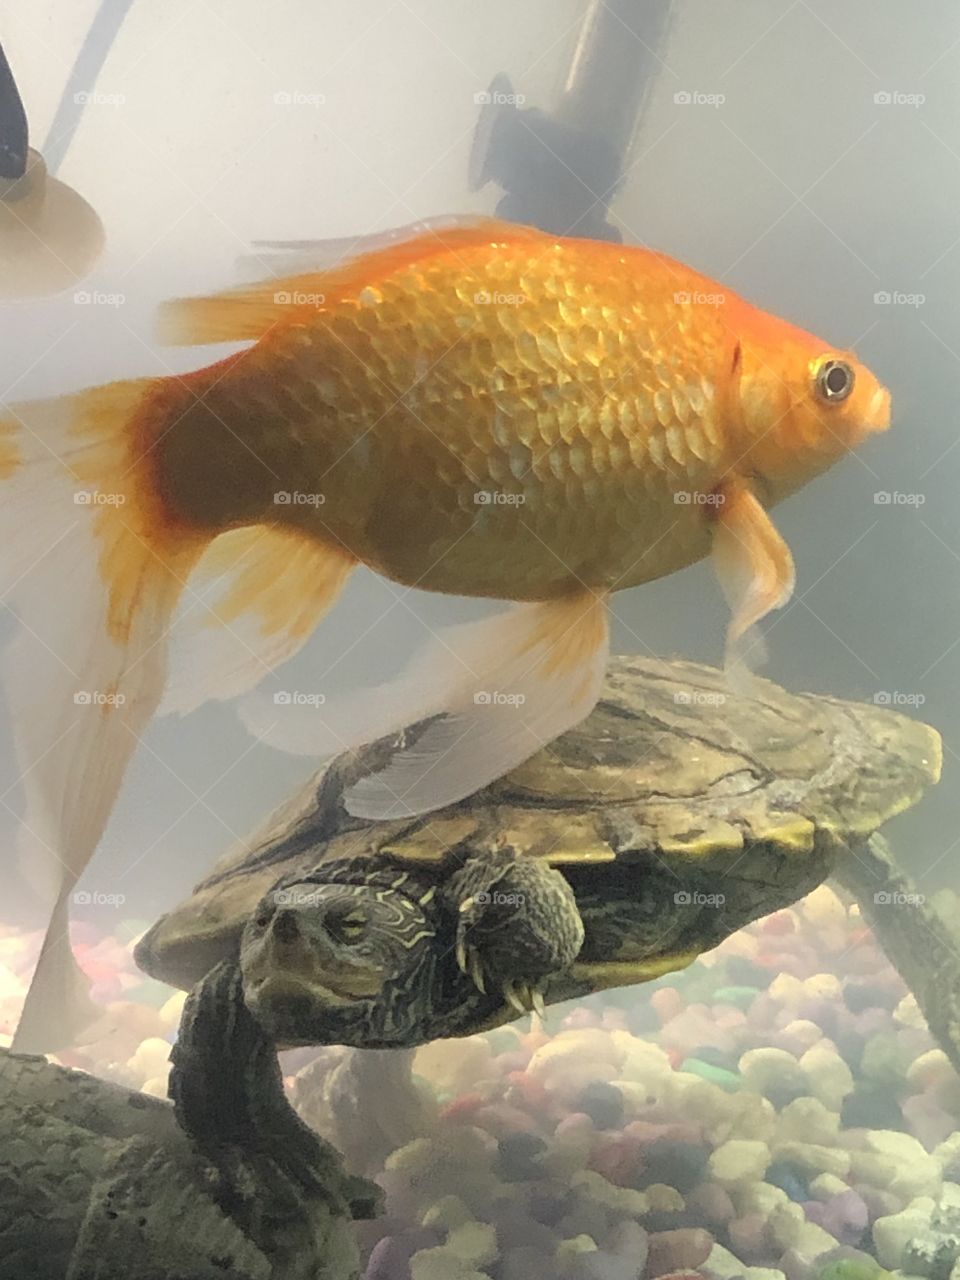 Turtle and a goldfish